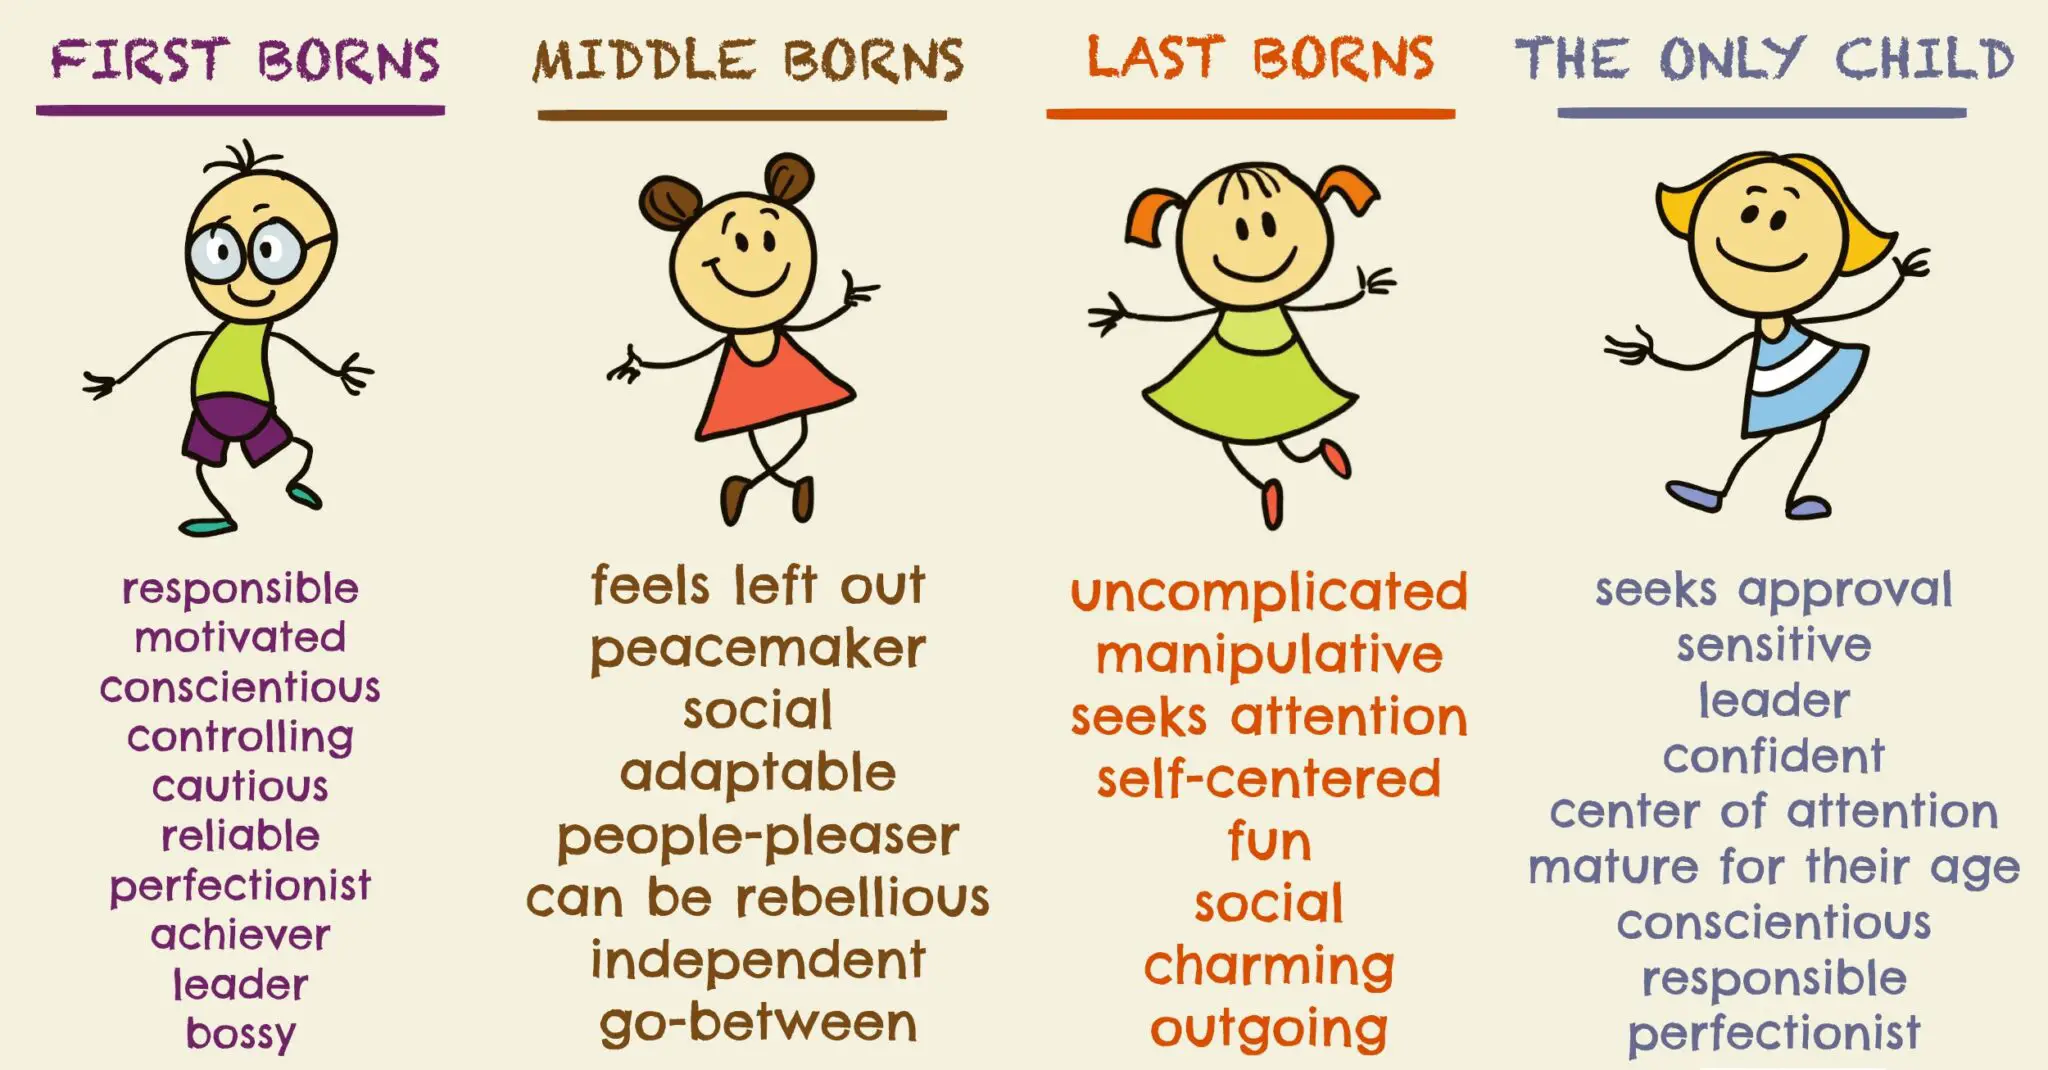 When Does Baby Personality Develop?